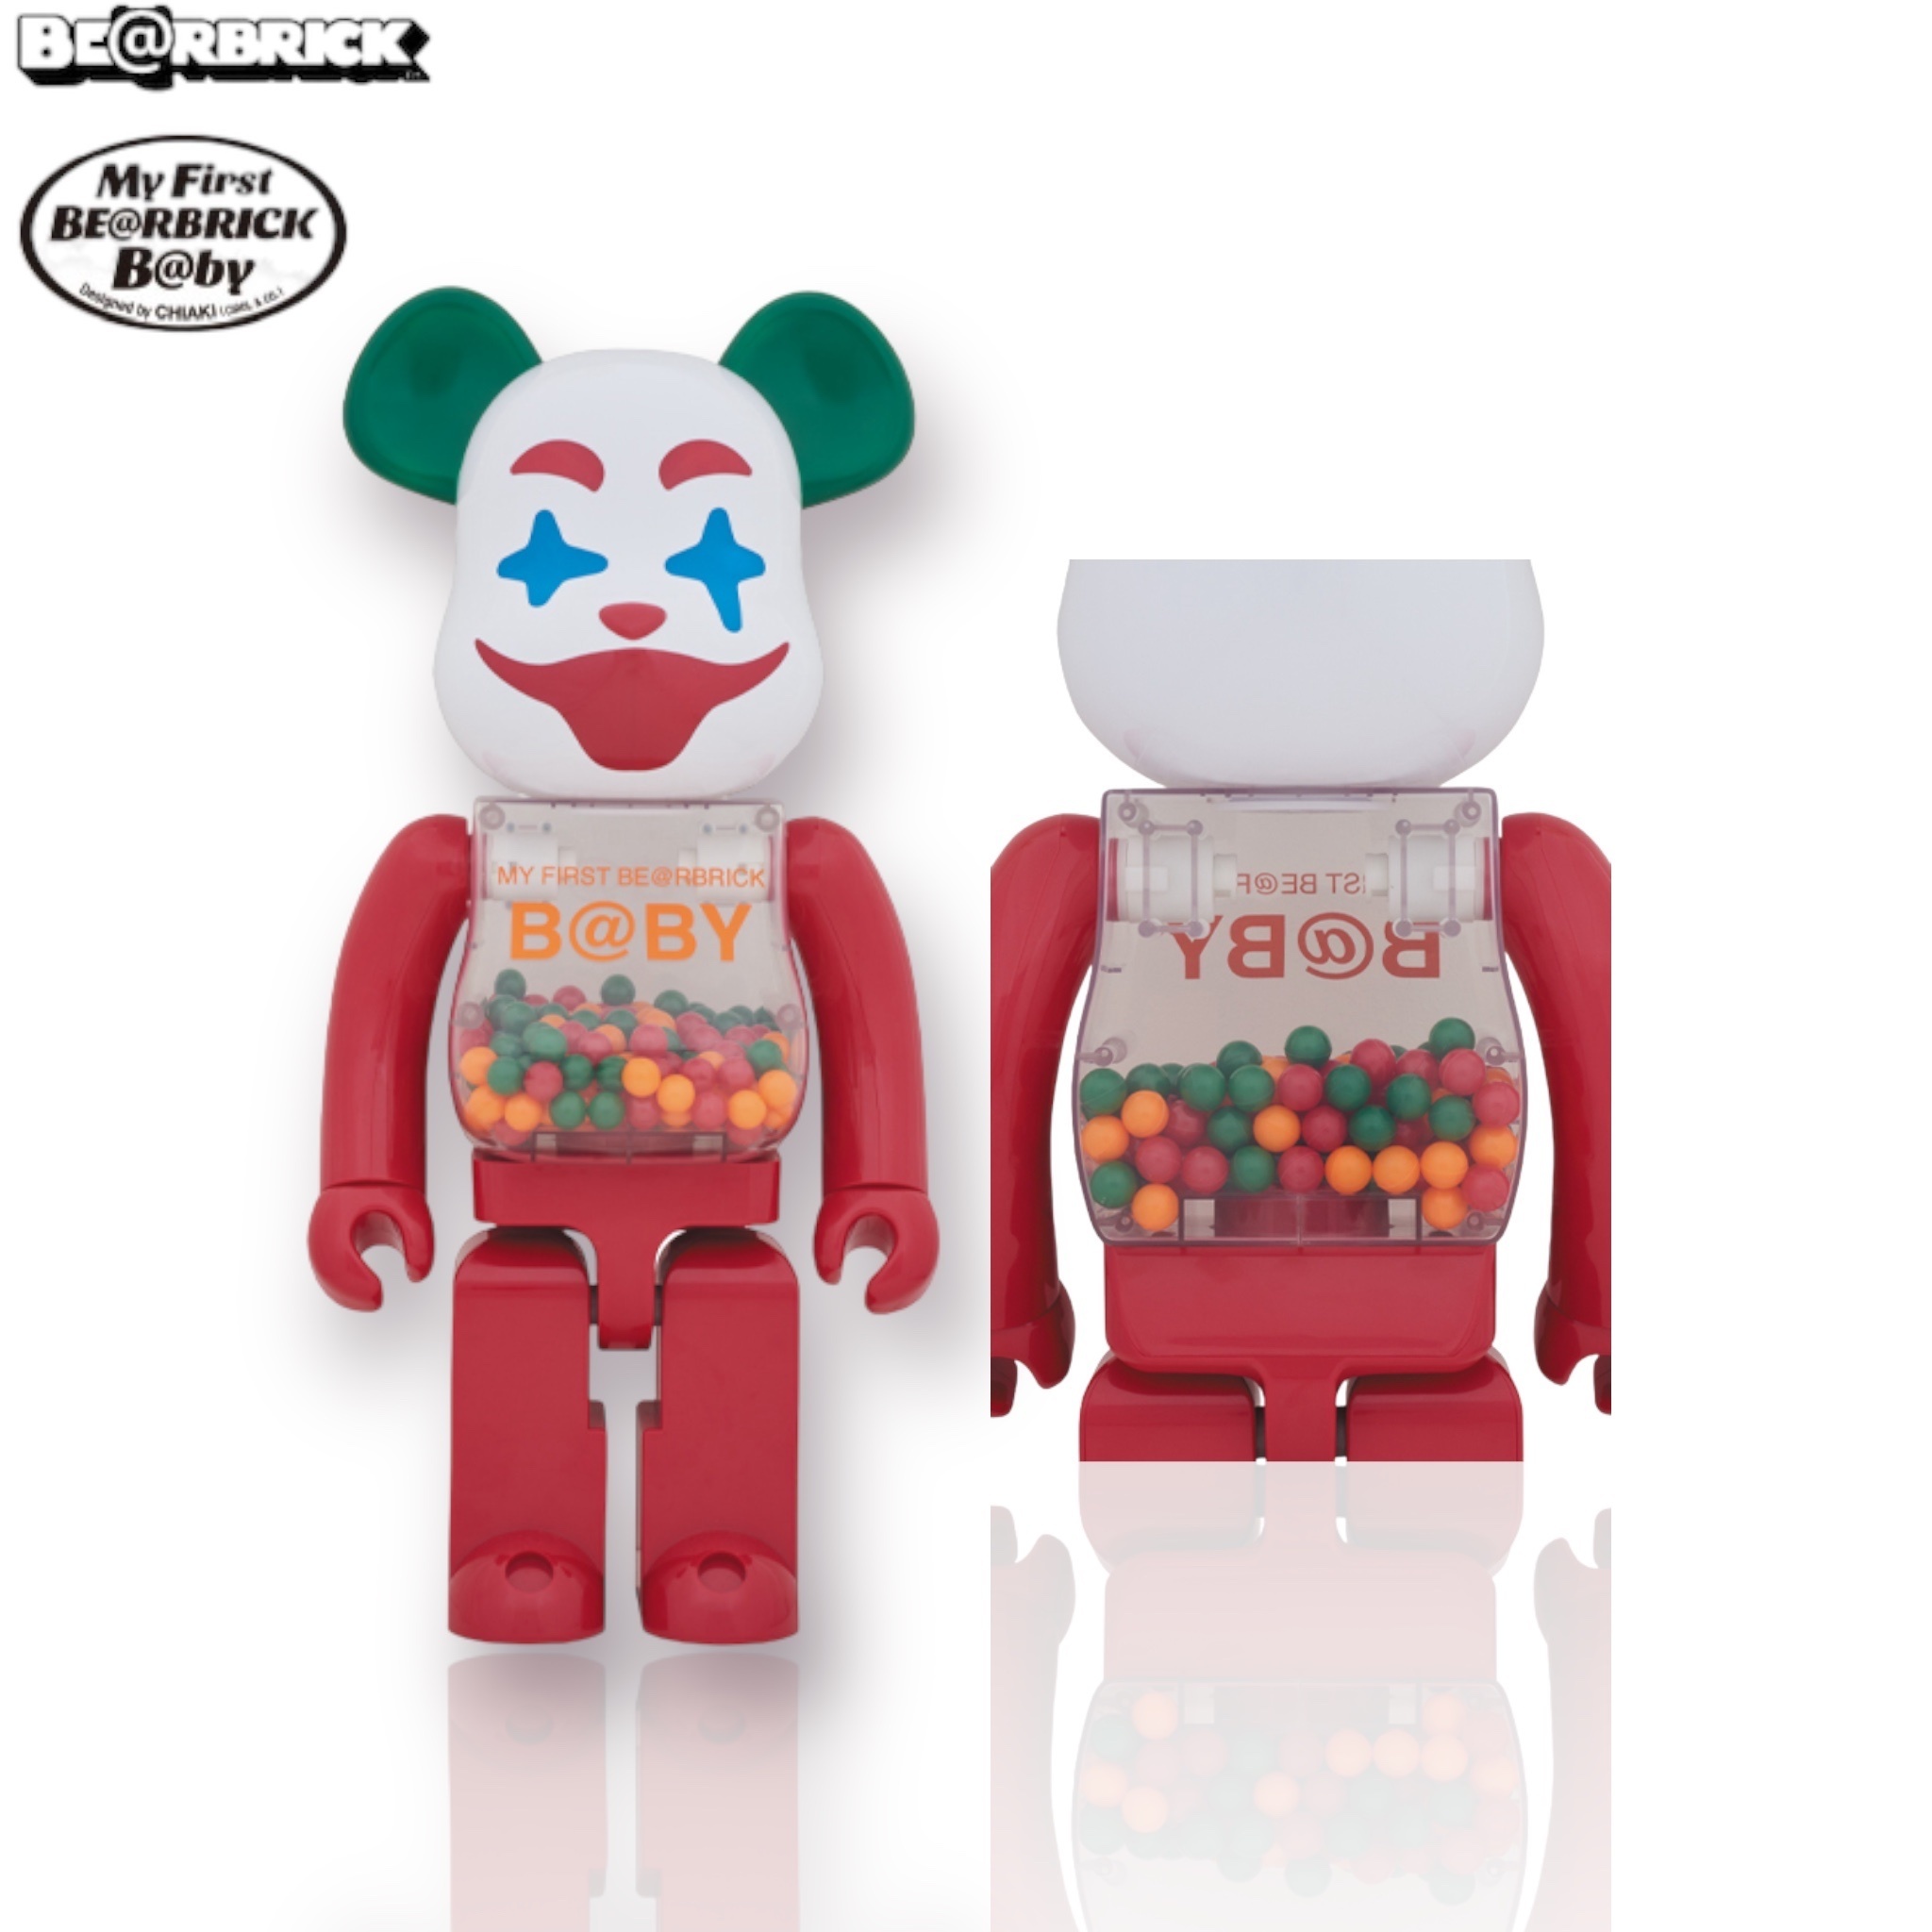 MY FIRST BE@RBRICK B@BY Jesterフィギュア